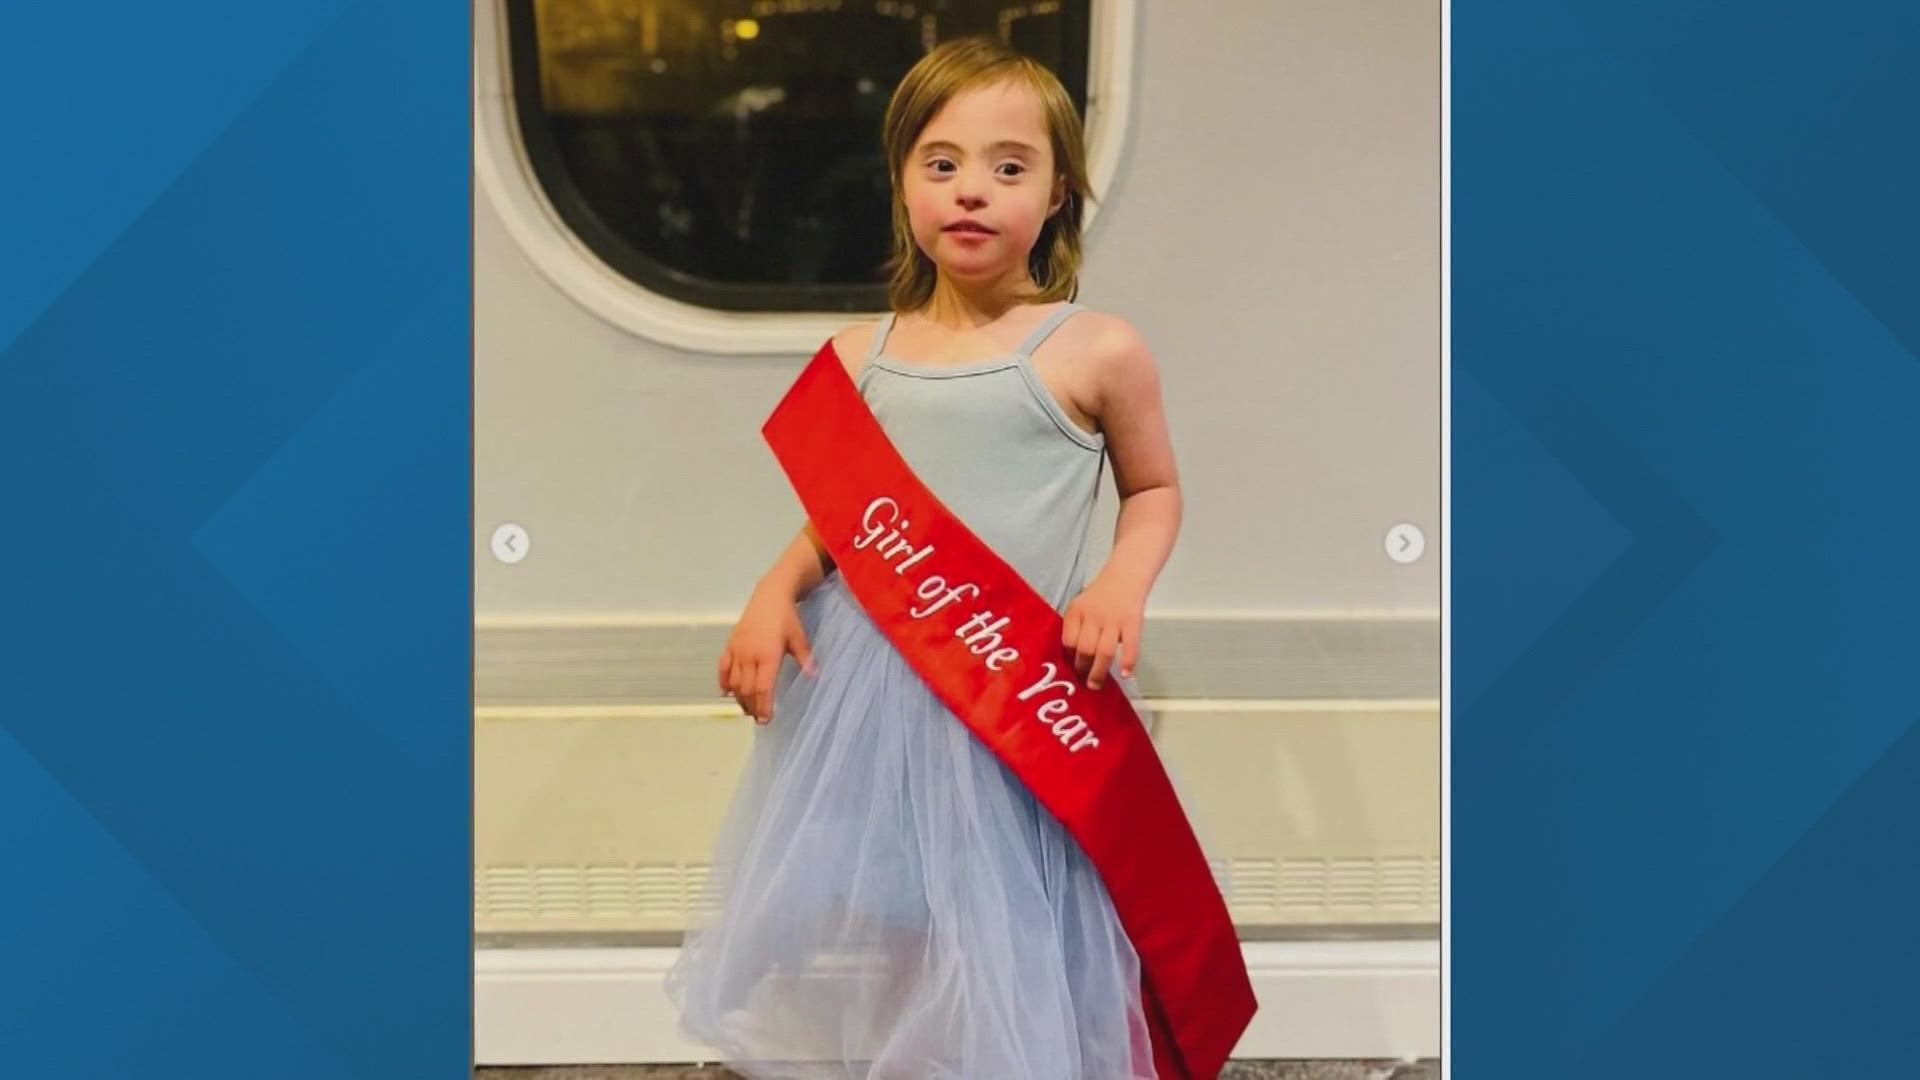 Two heart surgeries were not Grace Fryfogle's biggest battles to come. But in 2022, Grace got to ring the bell at Nationwide Children’s Hospital.